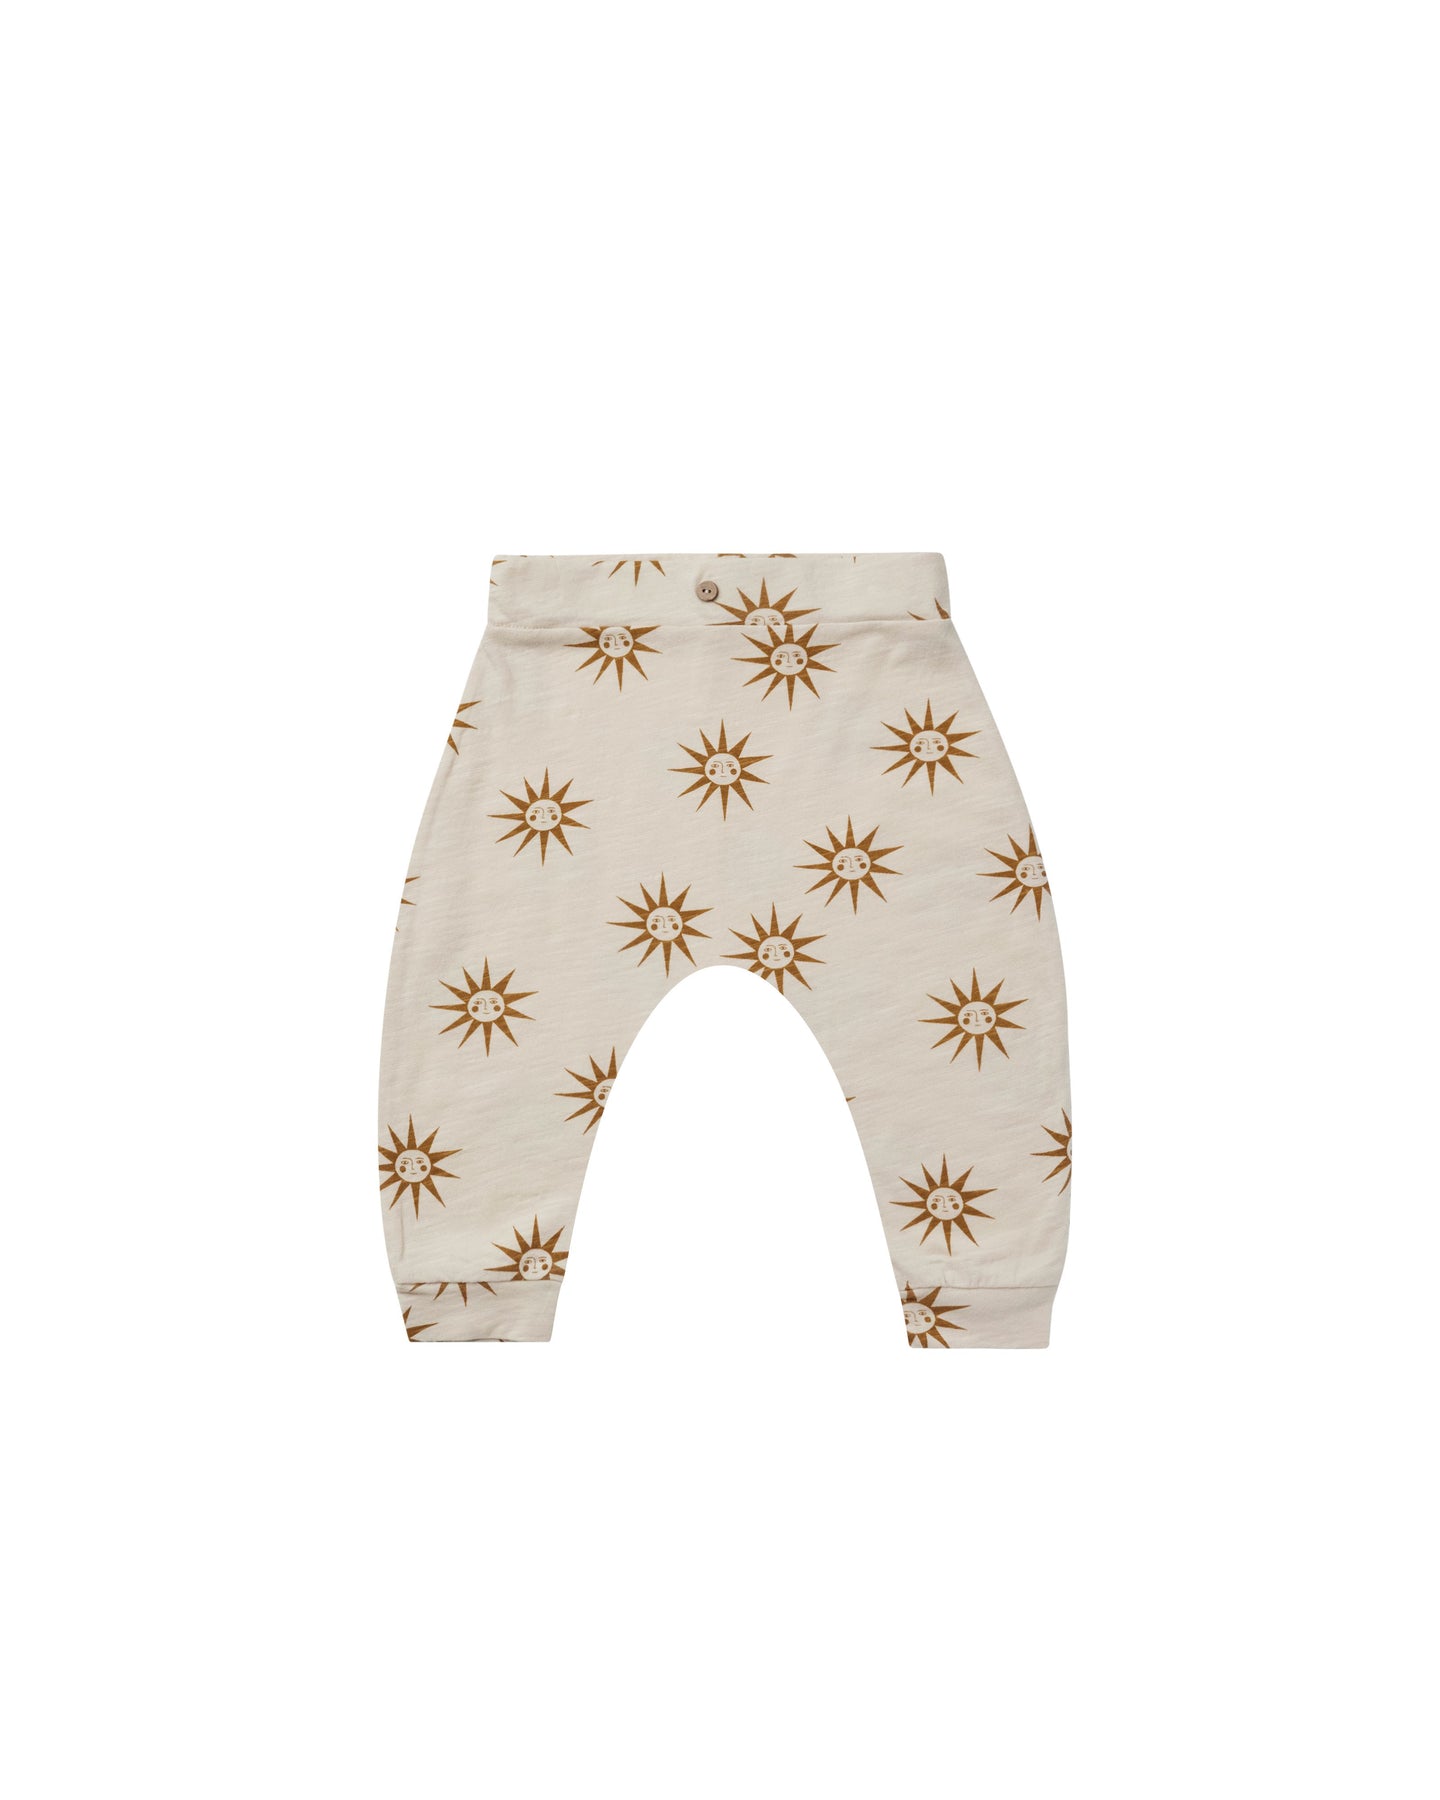 Rylee + Cru - Slouch Pant- Suns - Natural